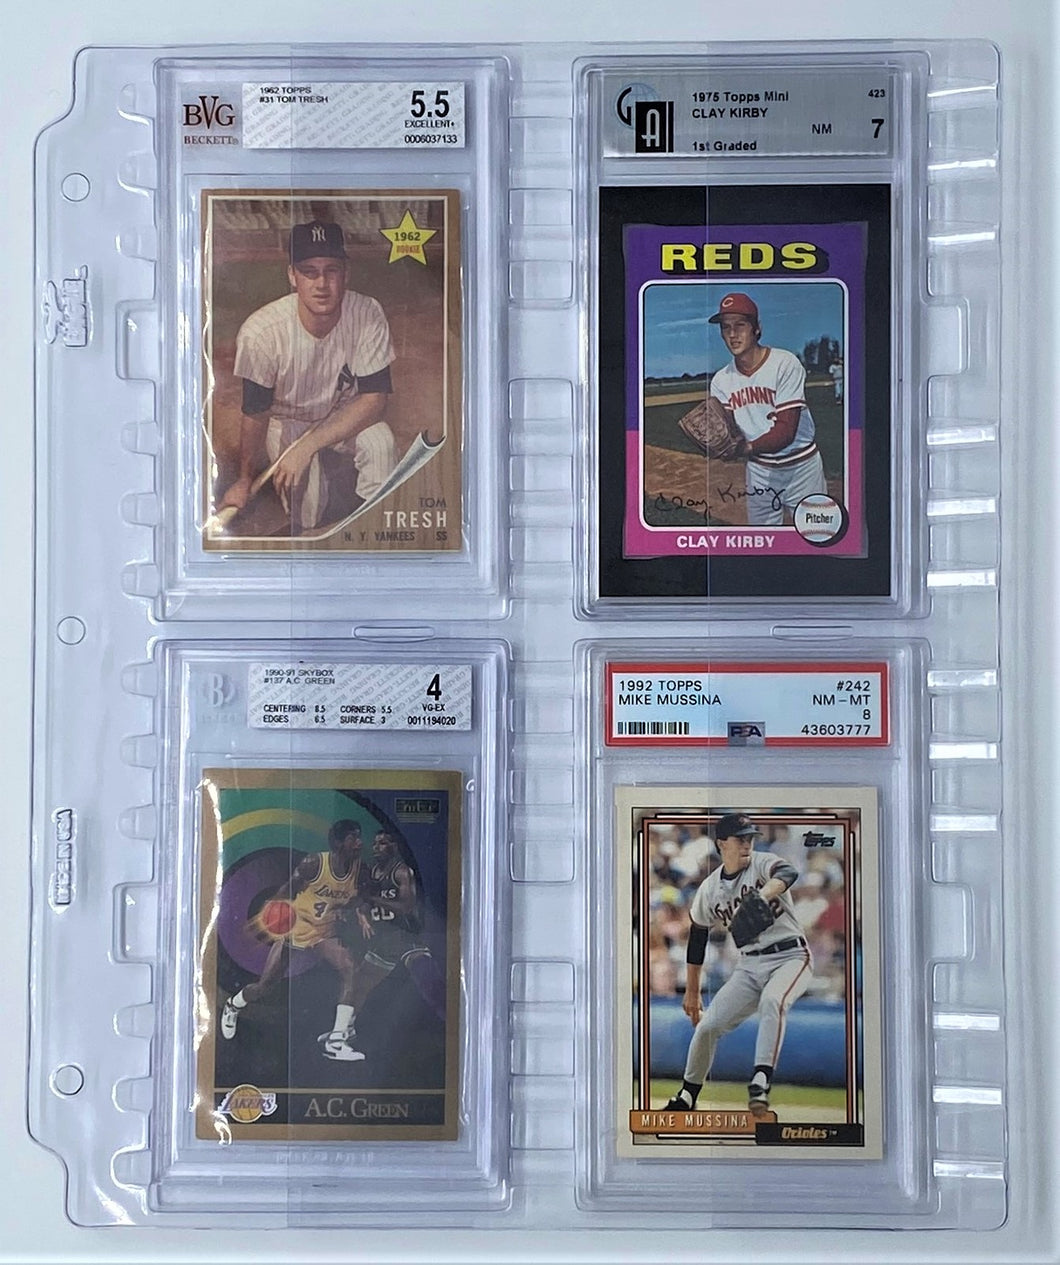 Eagle Album Pages for Graded Sports and Collectible Cards (No Album)